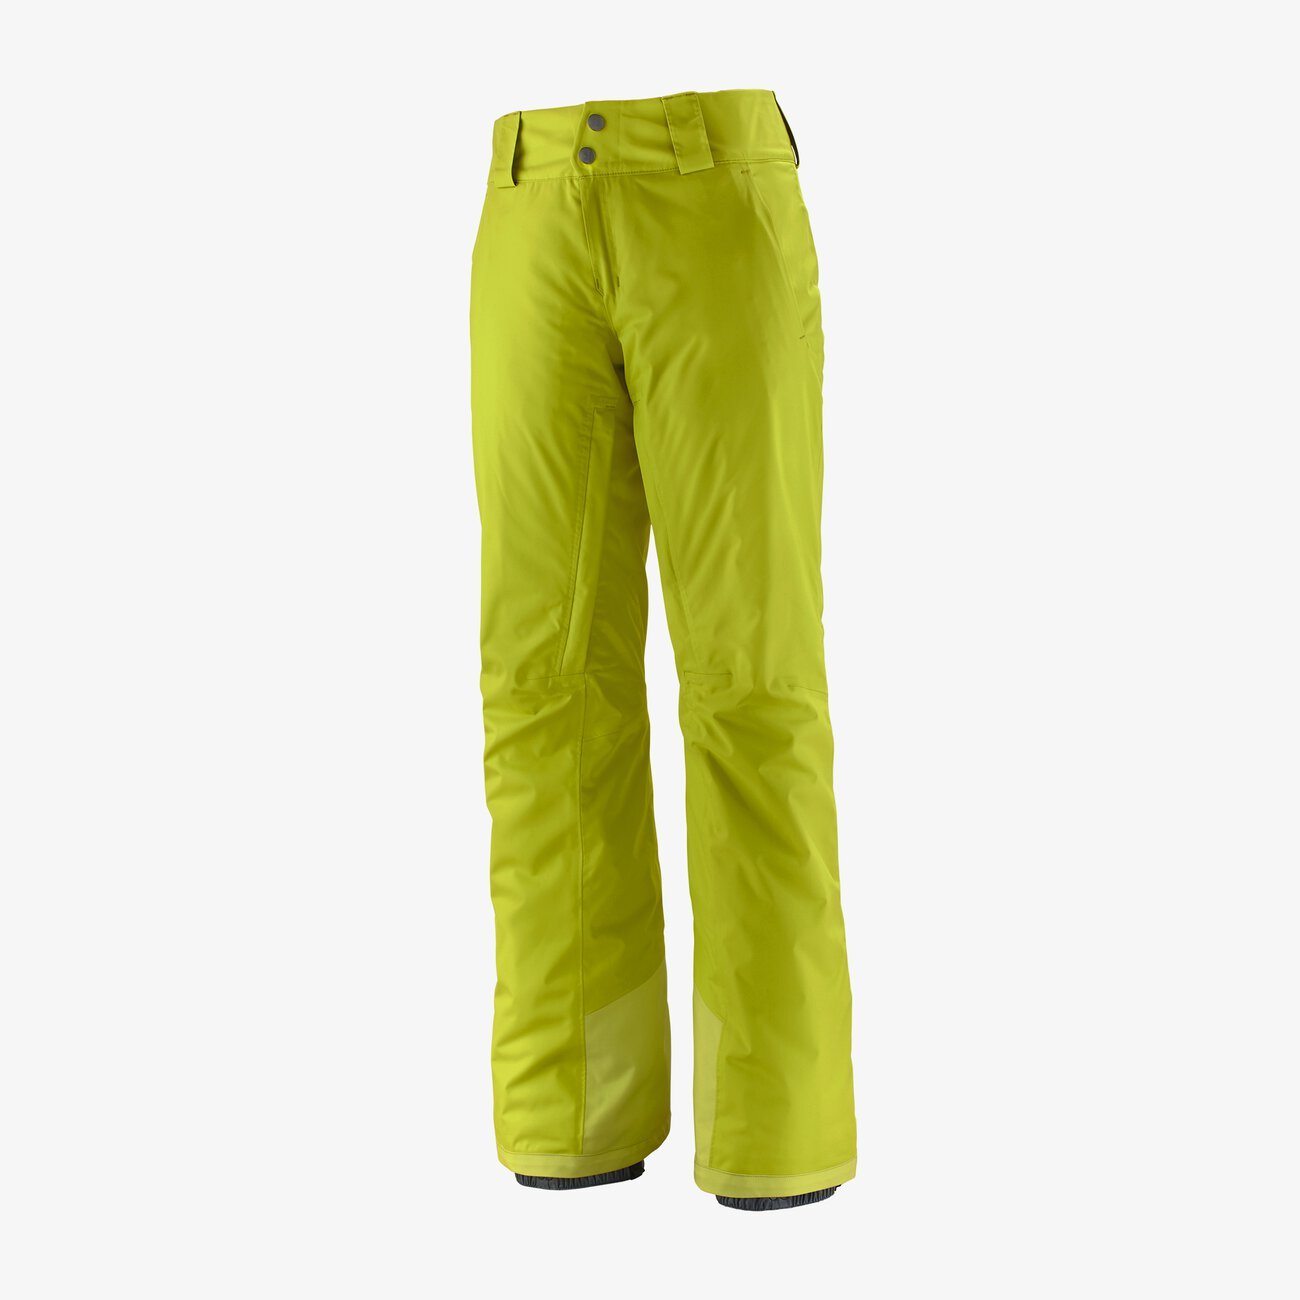 Patagonia Women's Insulated Snowbelle Pants - Reg, Chartreuse / S